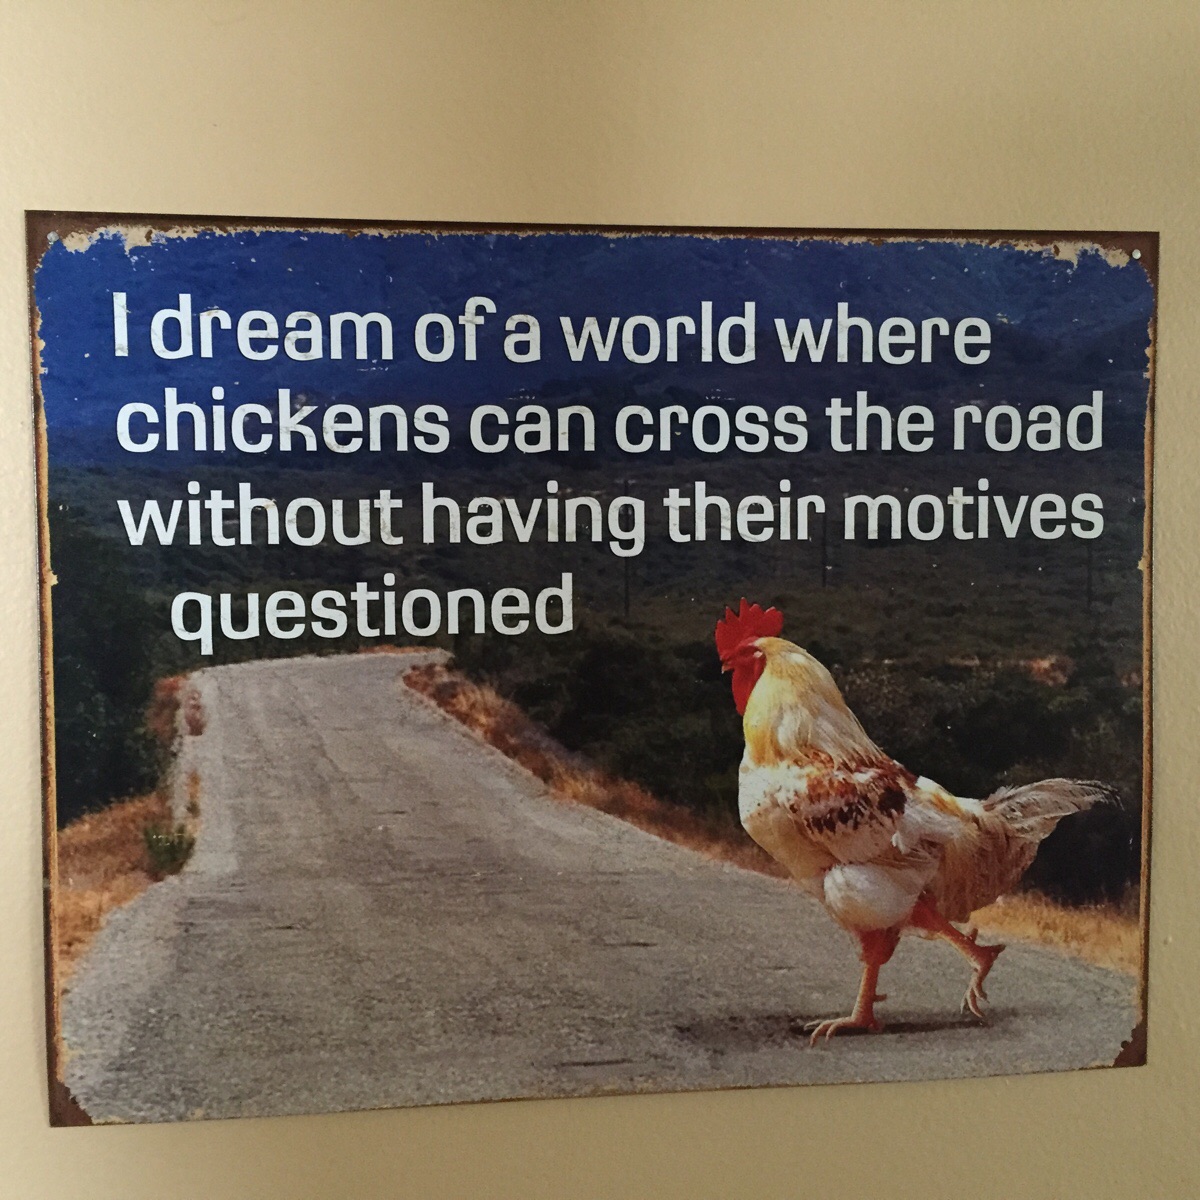 dream of a world where chickens can cross the road without having their motives questioned - I dream of a world where chickens can cross the road without having their motives questioned